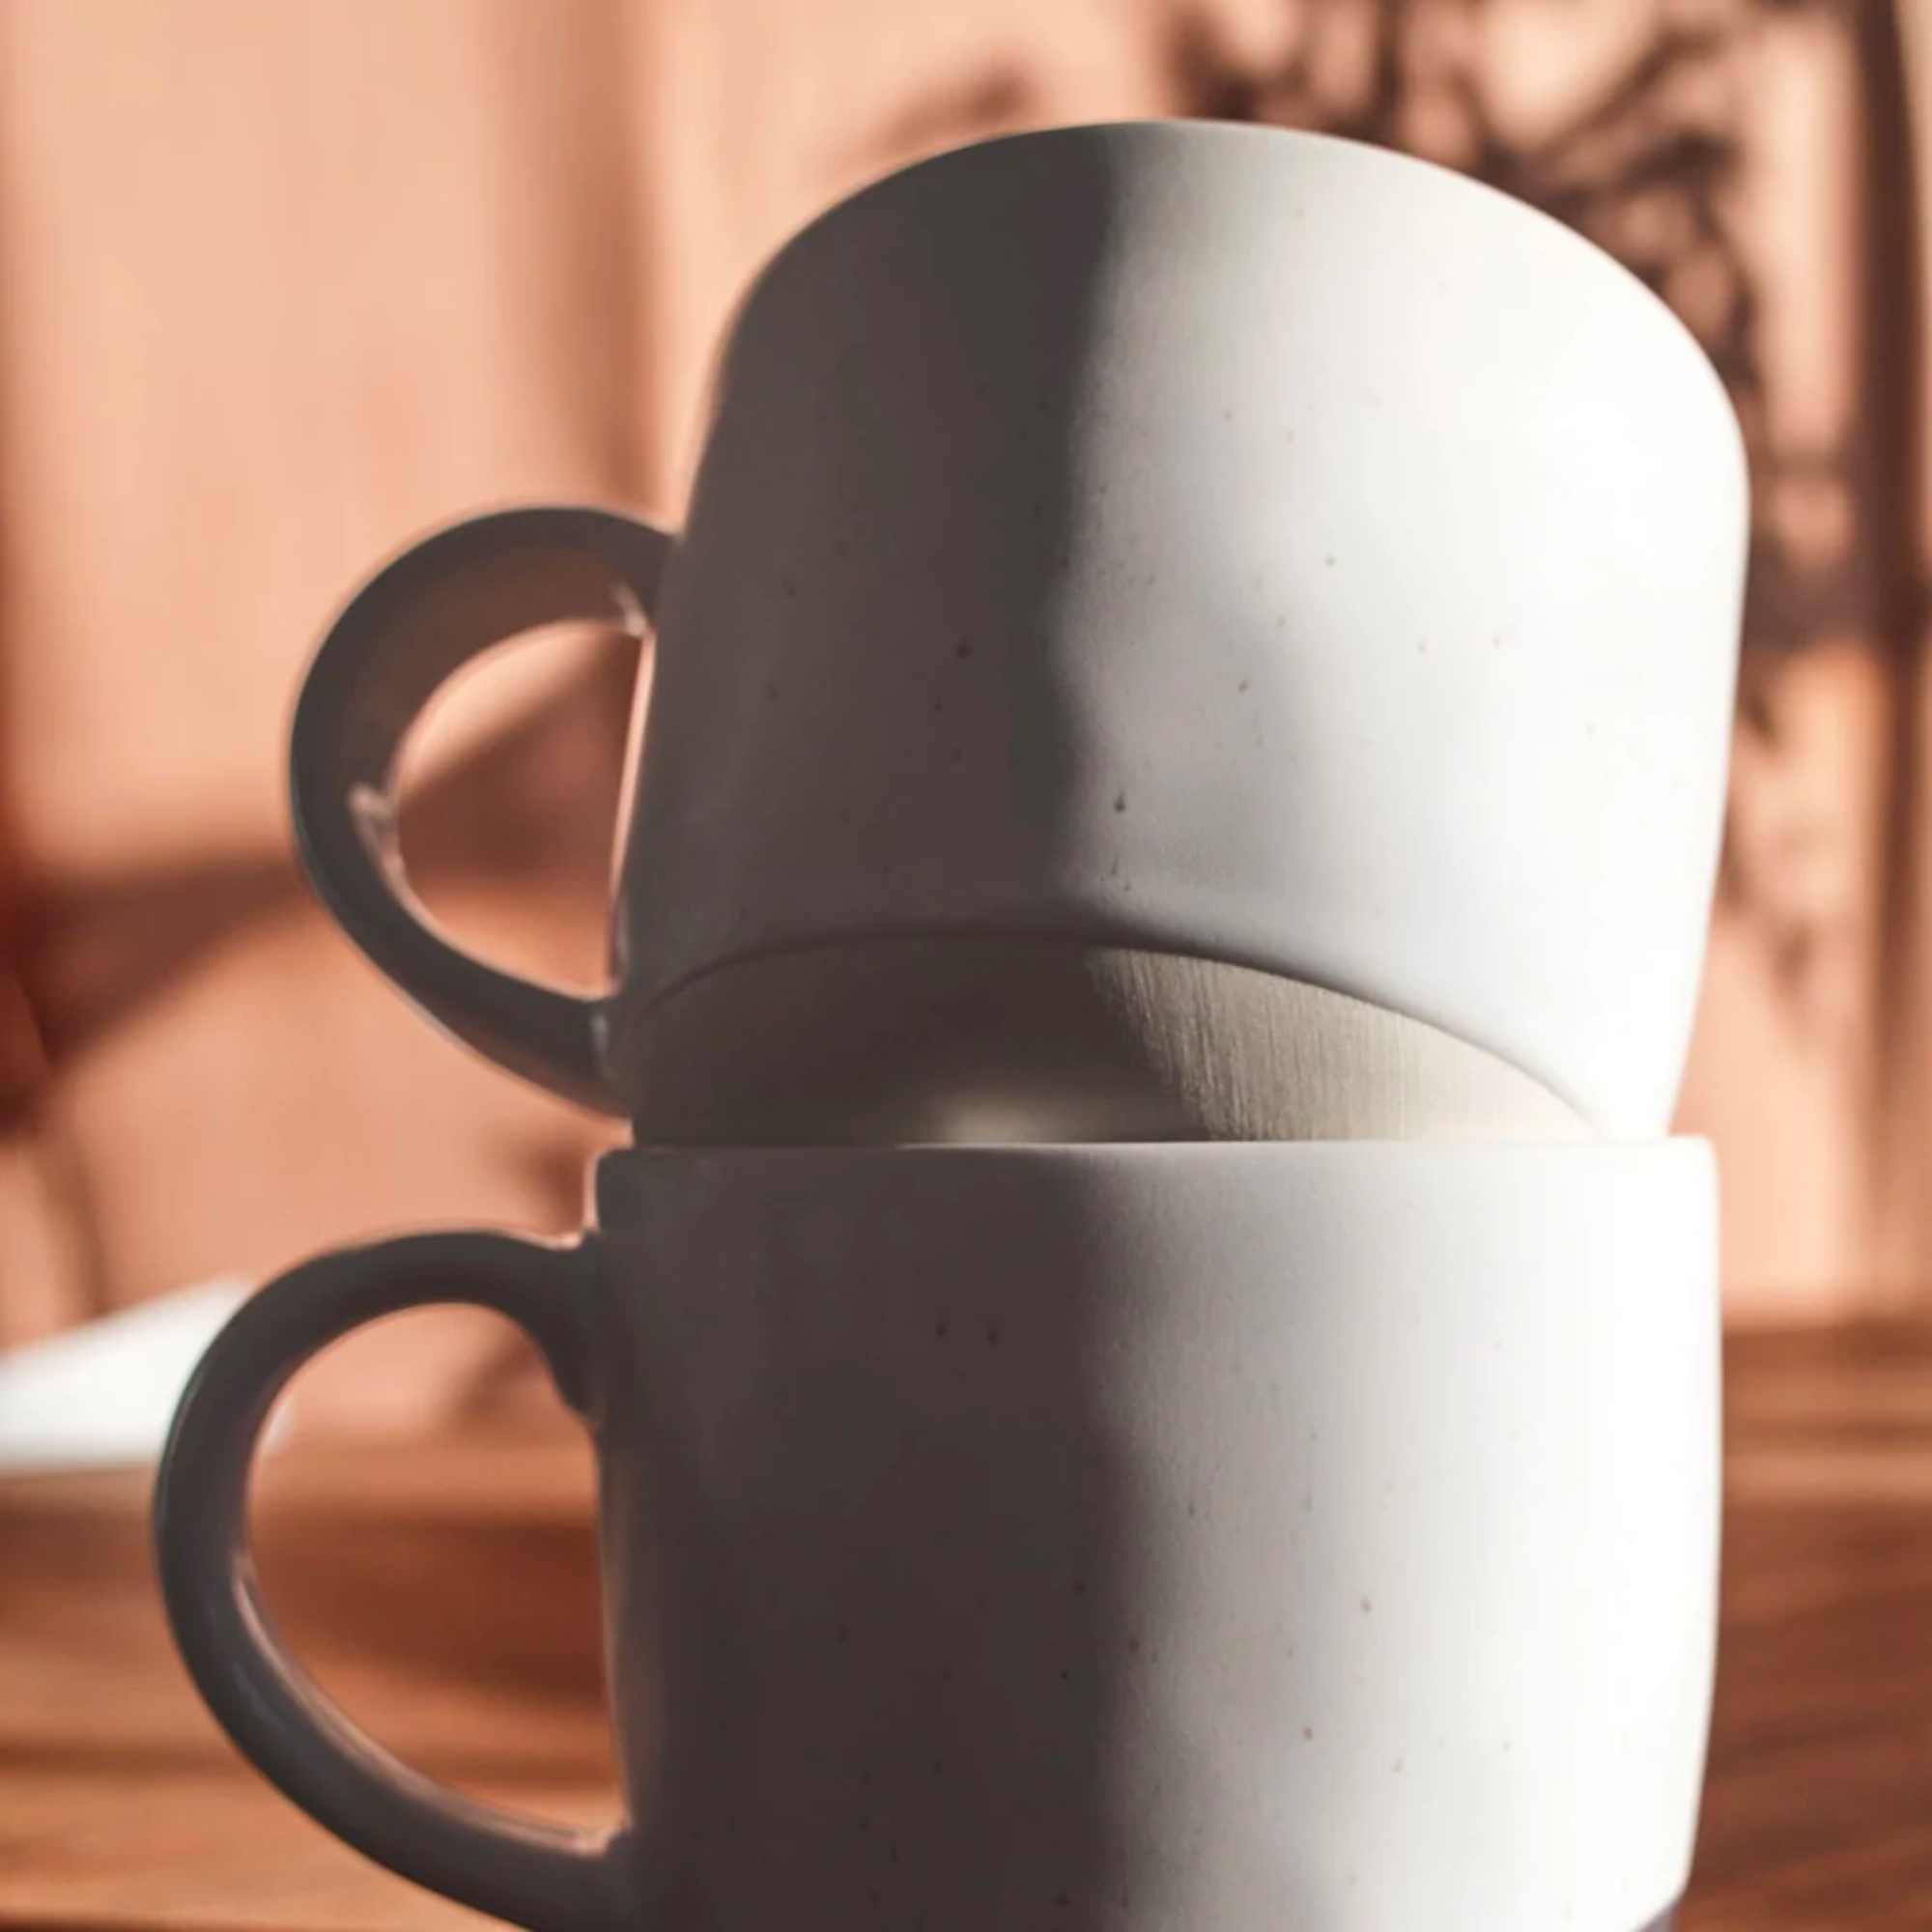 Fable Mugs - Speckled White